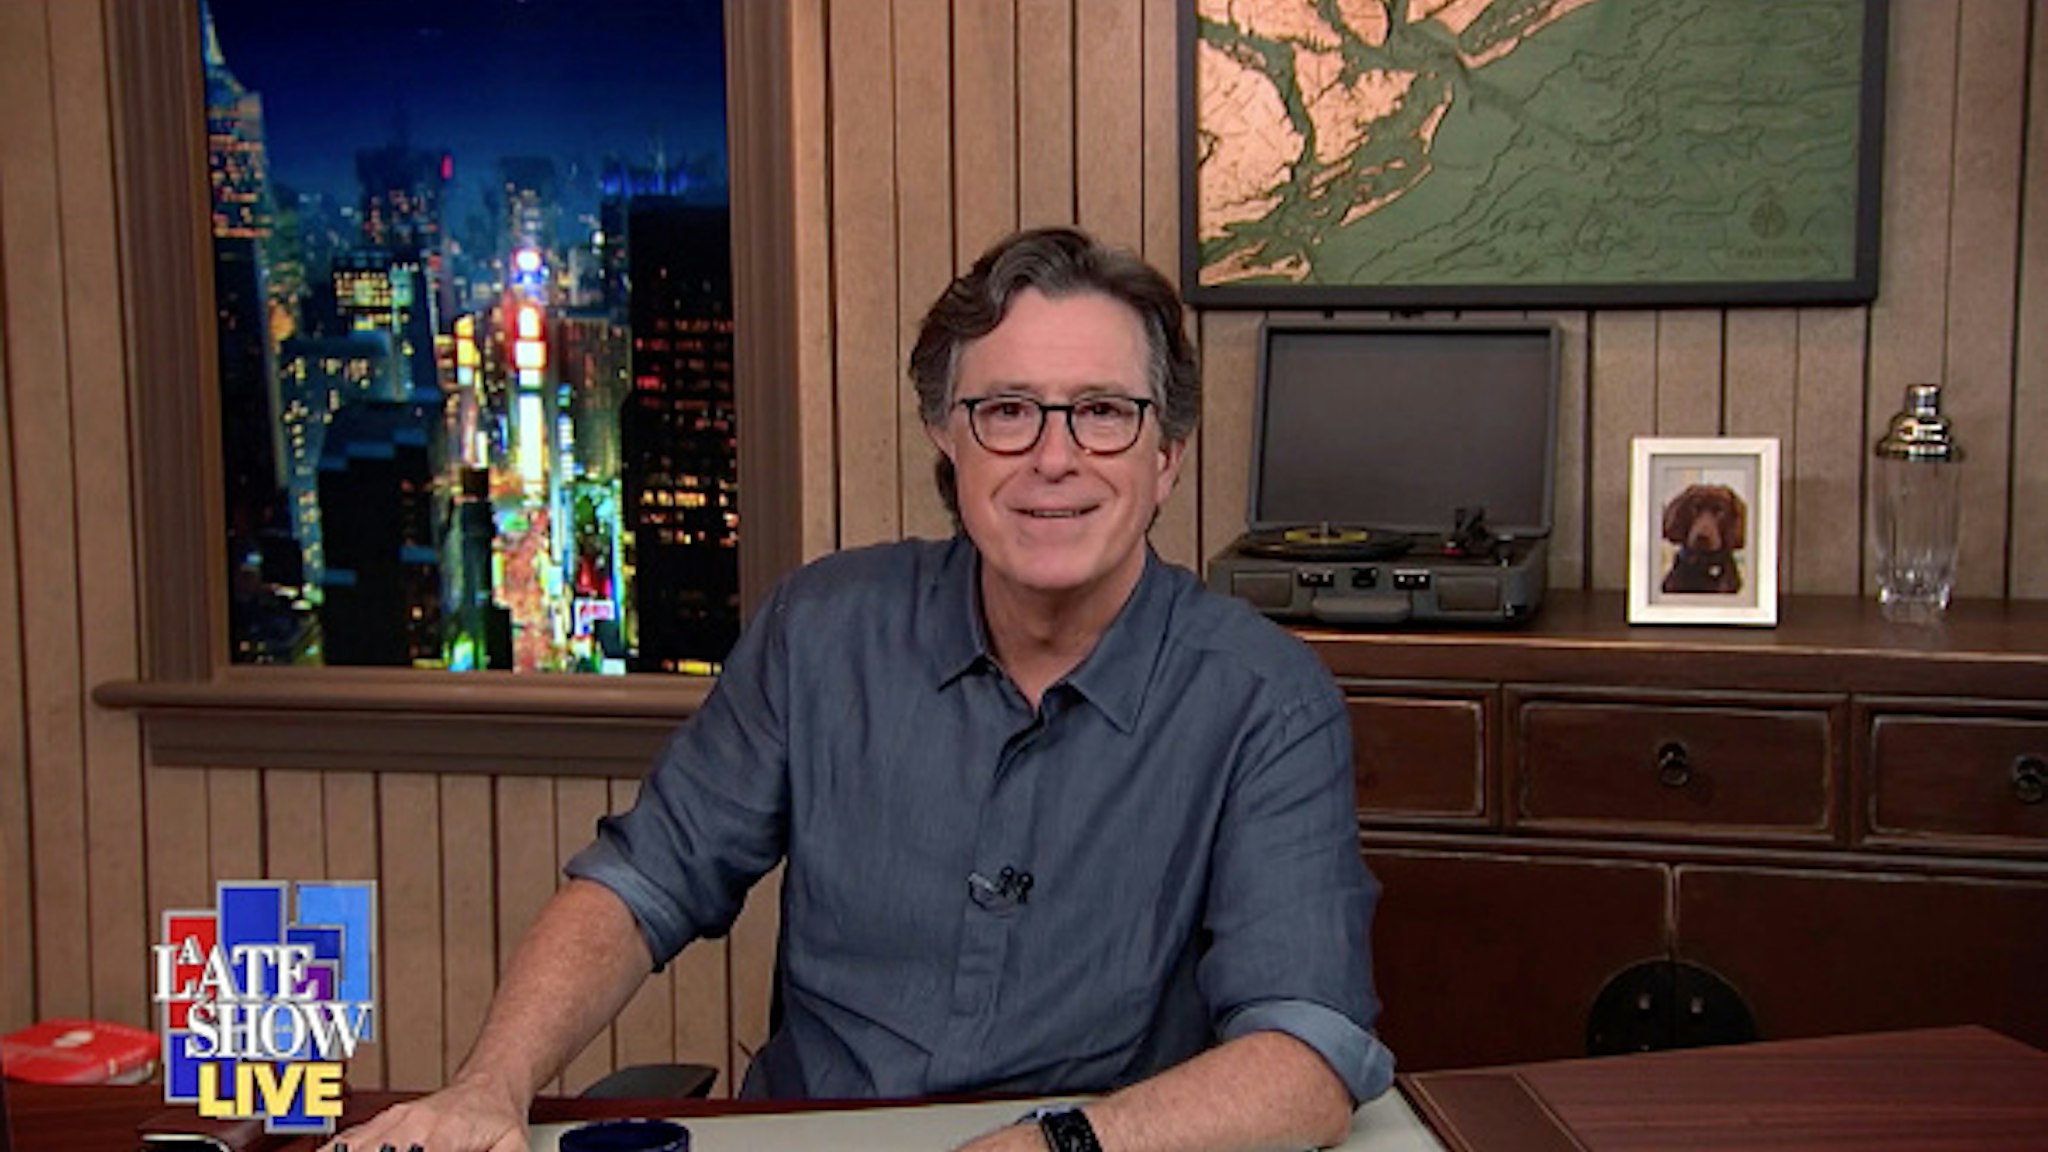 NEW YORK - AUGUST 26: The Late Show with Stephen Colbert during Tuesday's August 25, 2020 show. The Late Show will broadcast LIVE during the Republican National Convention. Image is a screen grab.